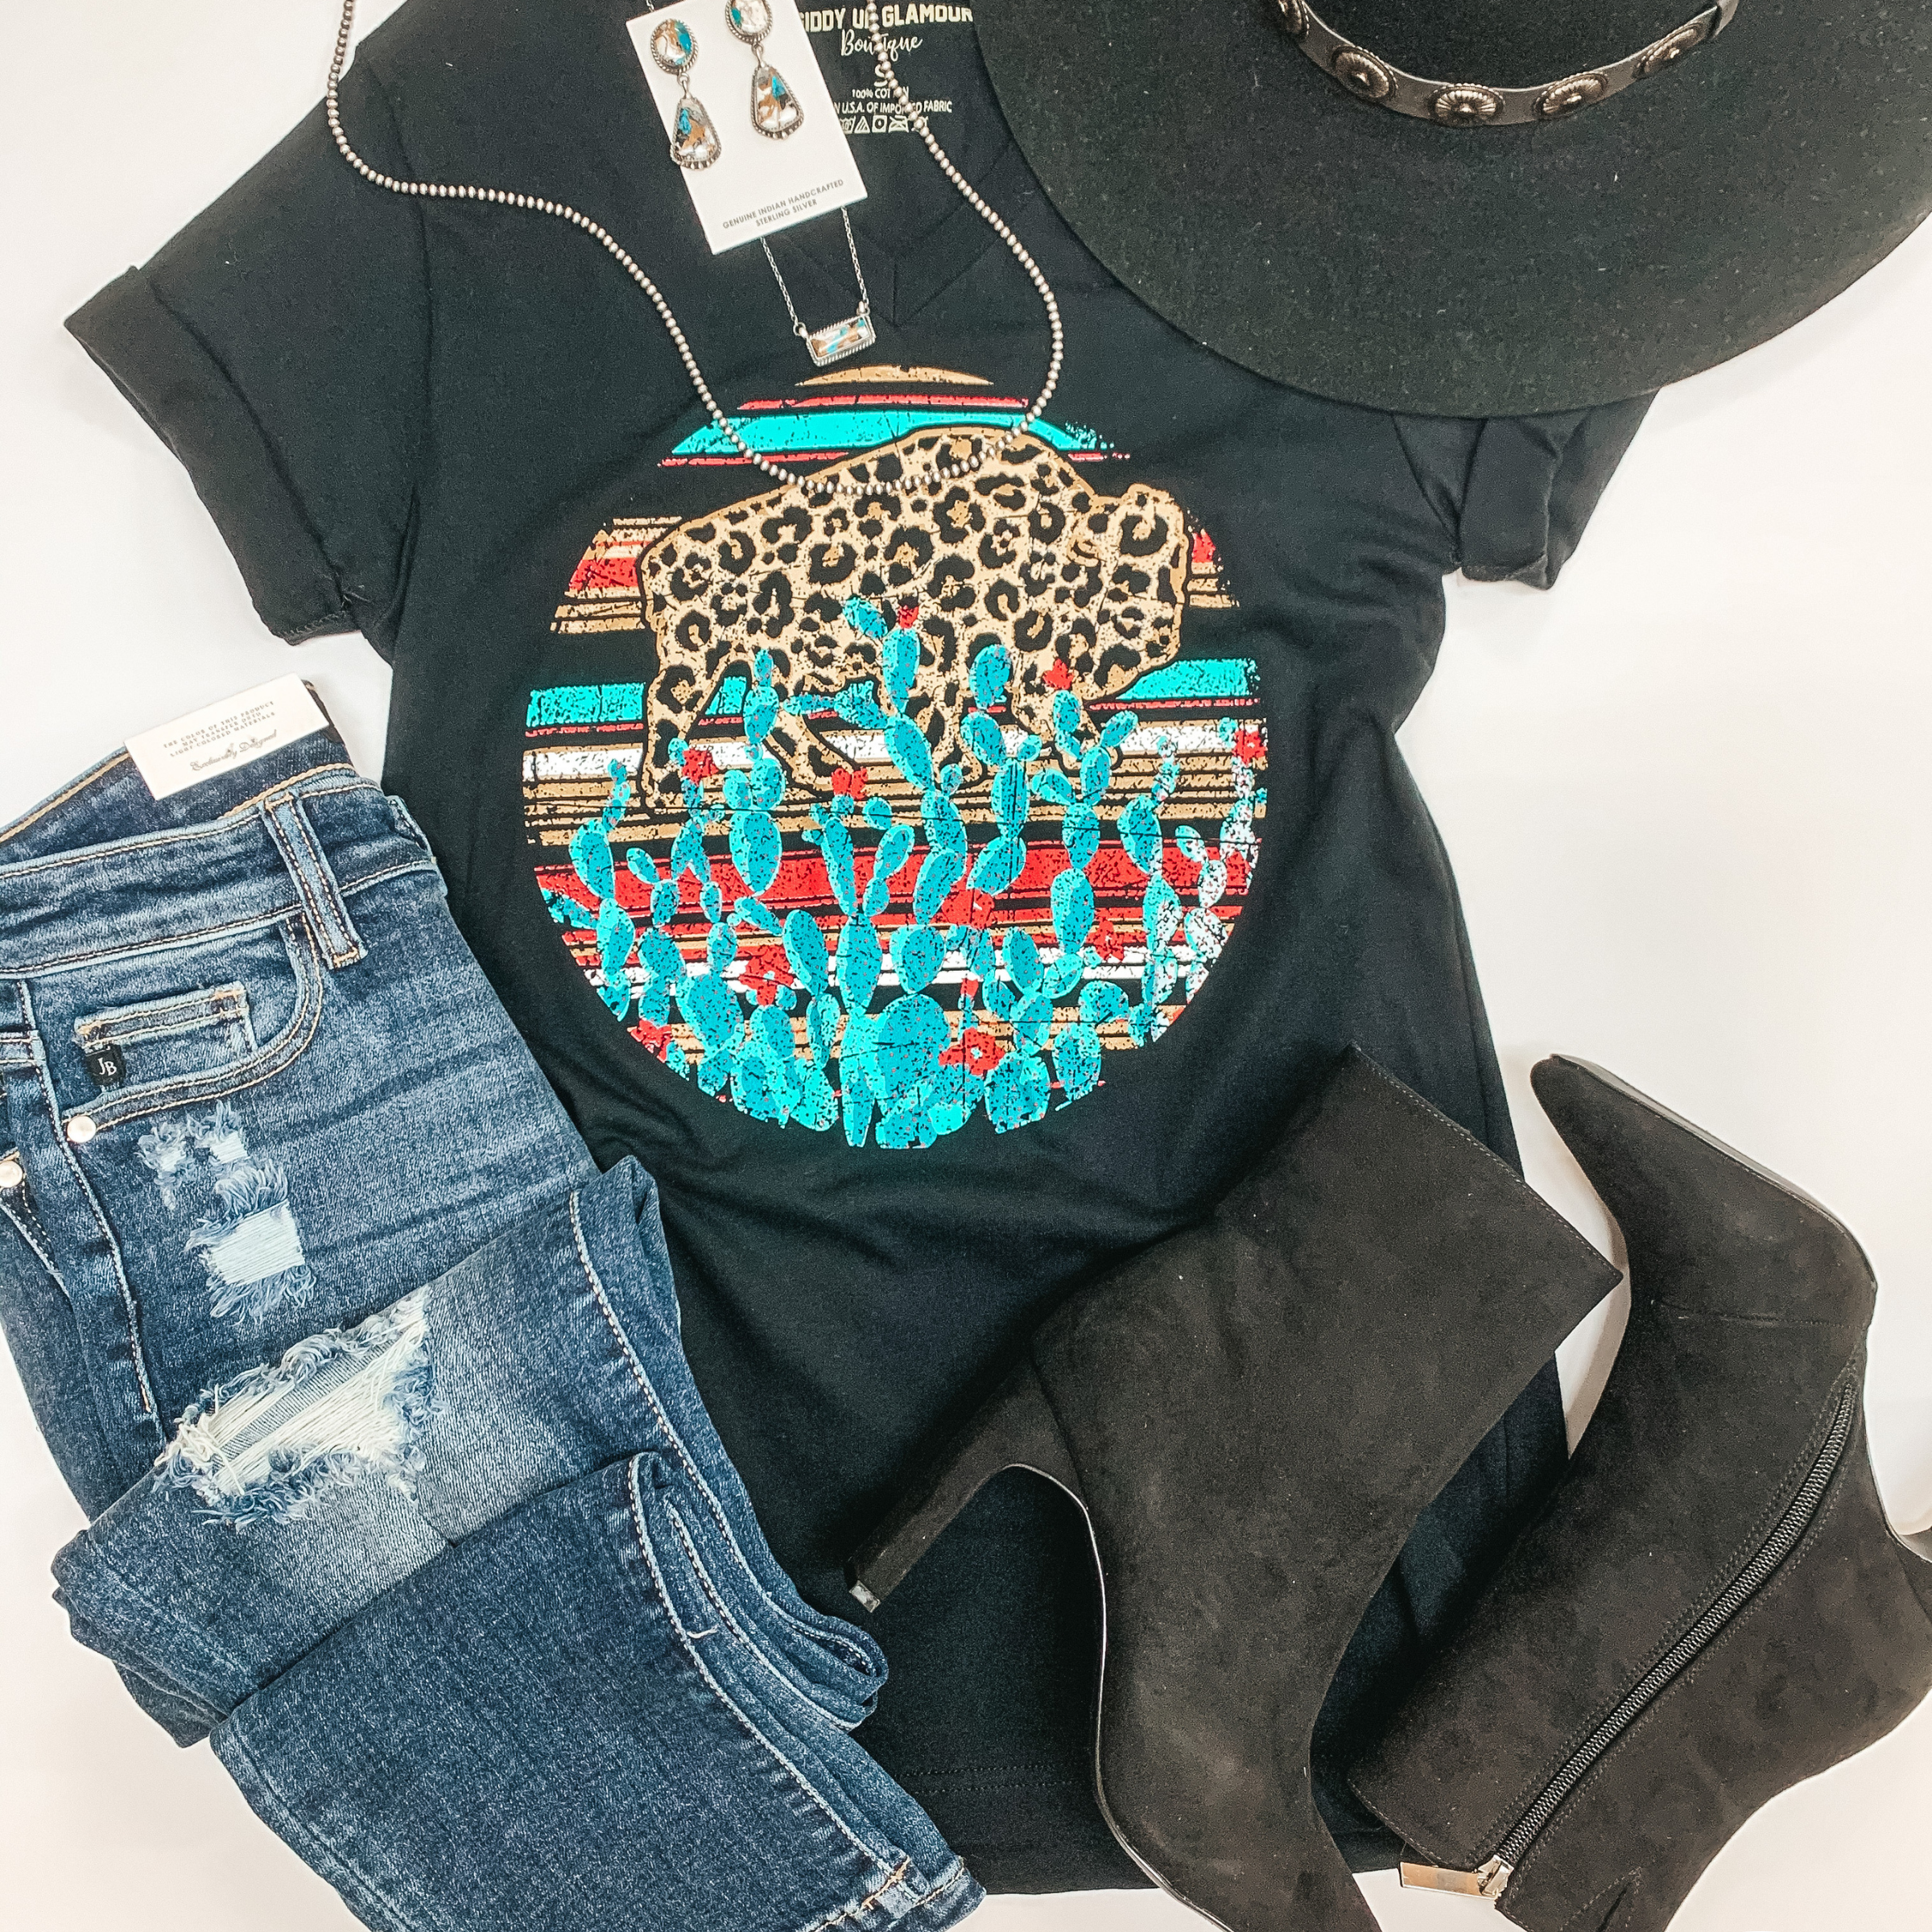 Bison Prairie Leopard Buffalo and Cactus Graphic Tee in Black - Giddy Up Glamour Boutique